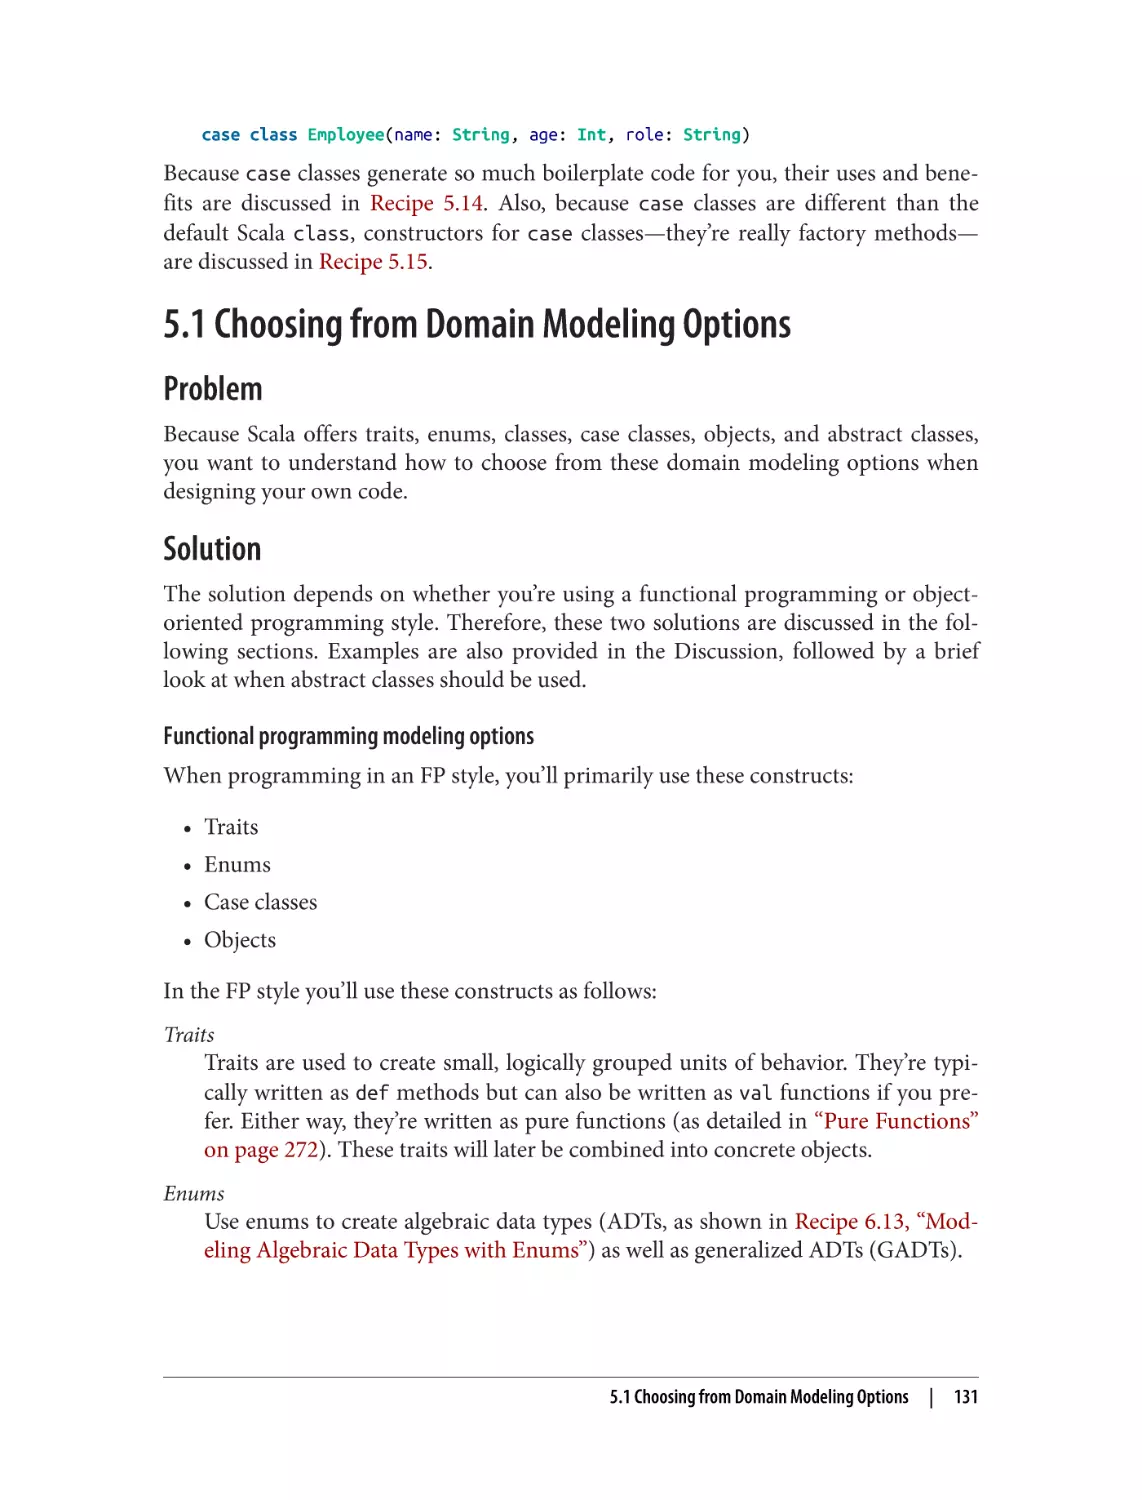 5.1 Choosing from Domain Modeling Options
Problem
Solution